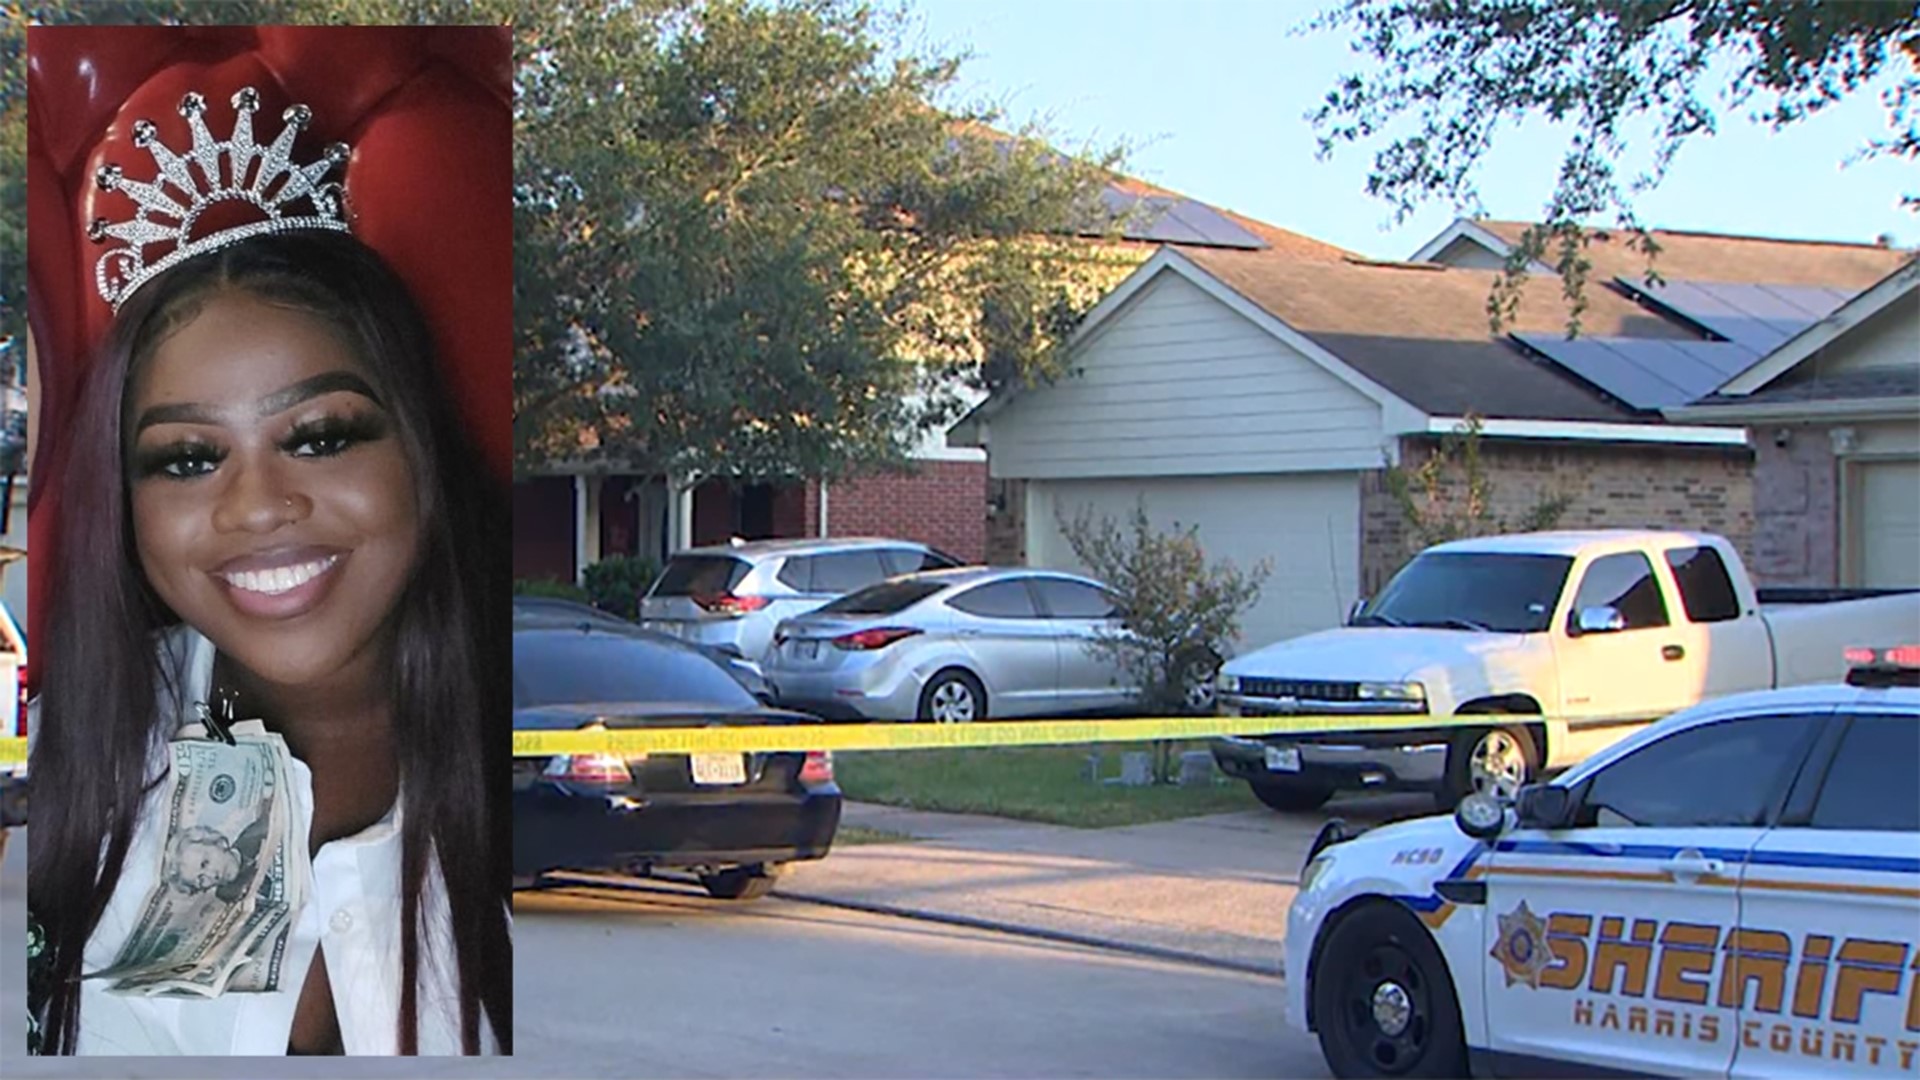 A man shot and killed his ex-girlfriend before shooting and killing himself, authorities said.